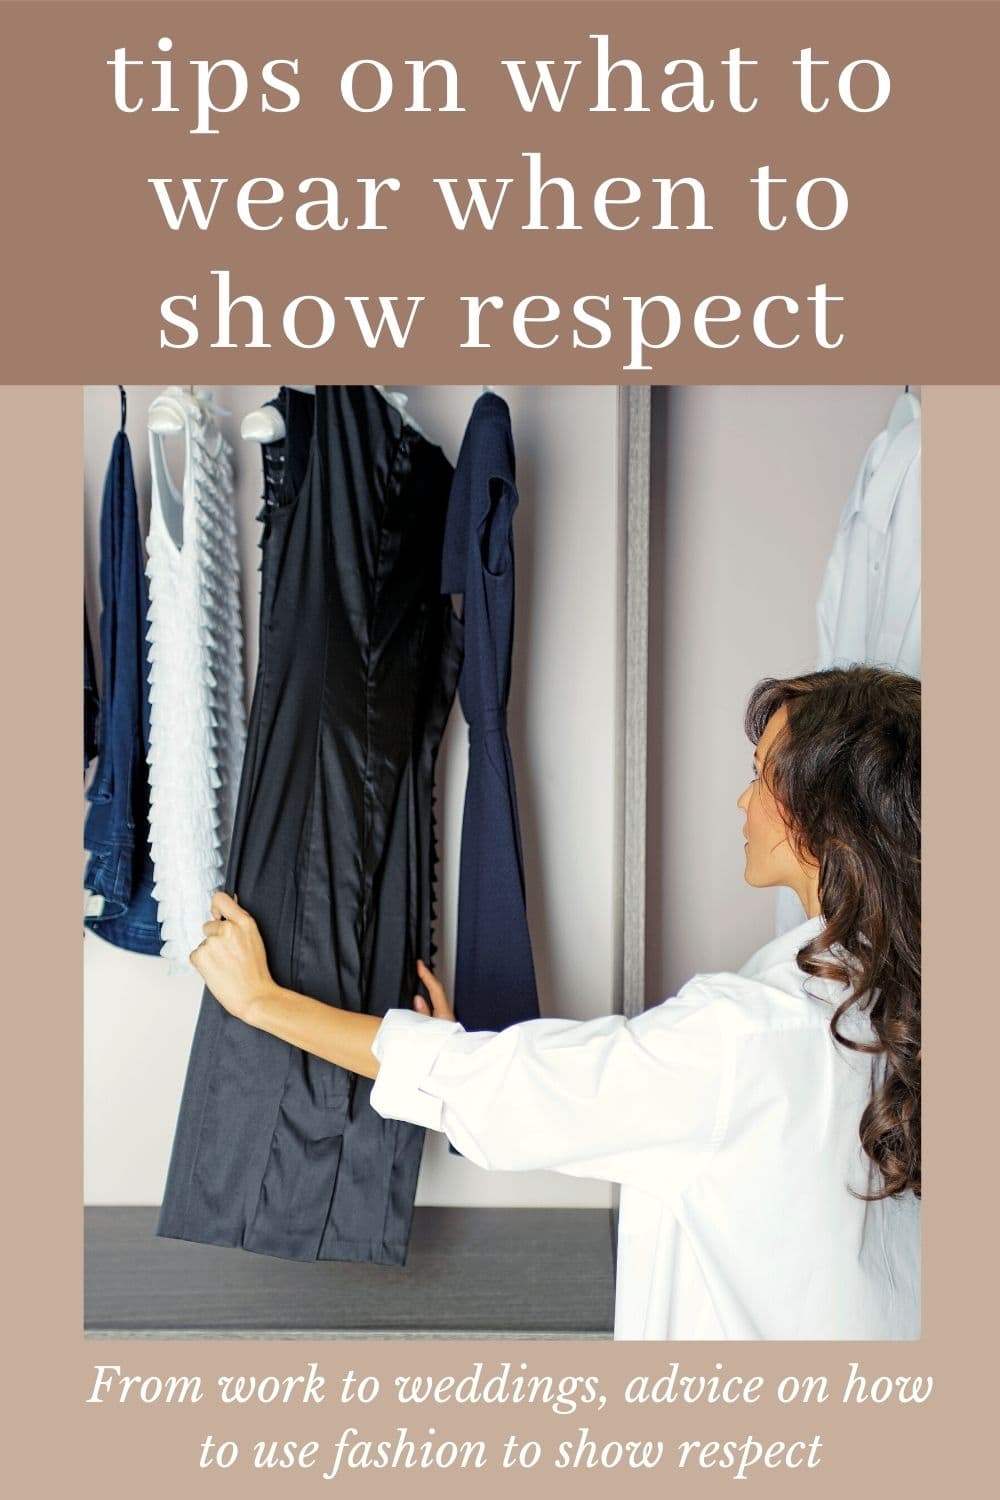 How to Dress for Respect for Most Any Situation